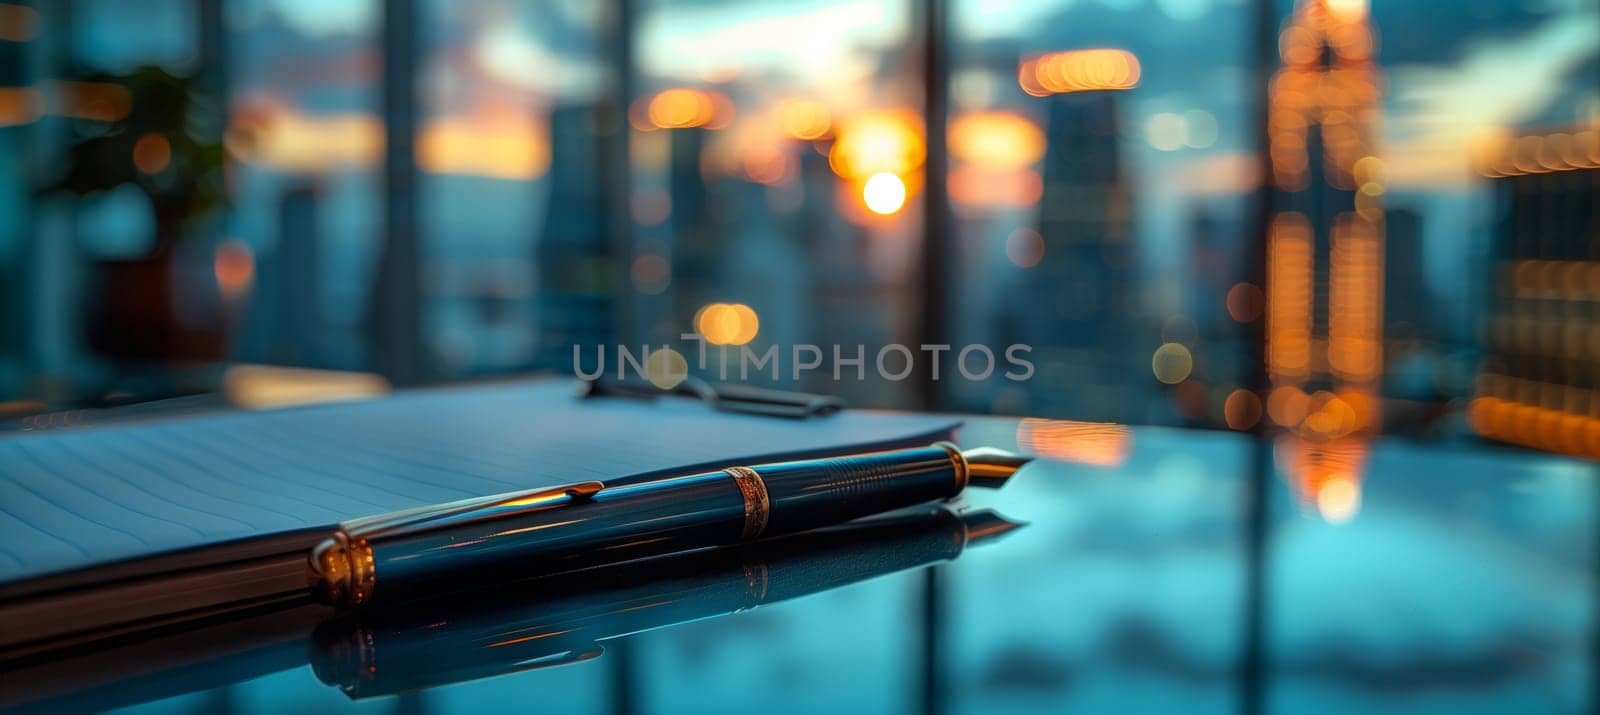 A notebook and pen rest on a wooden table near a window overlooking the city by richwolf